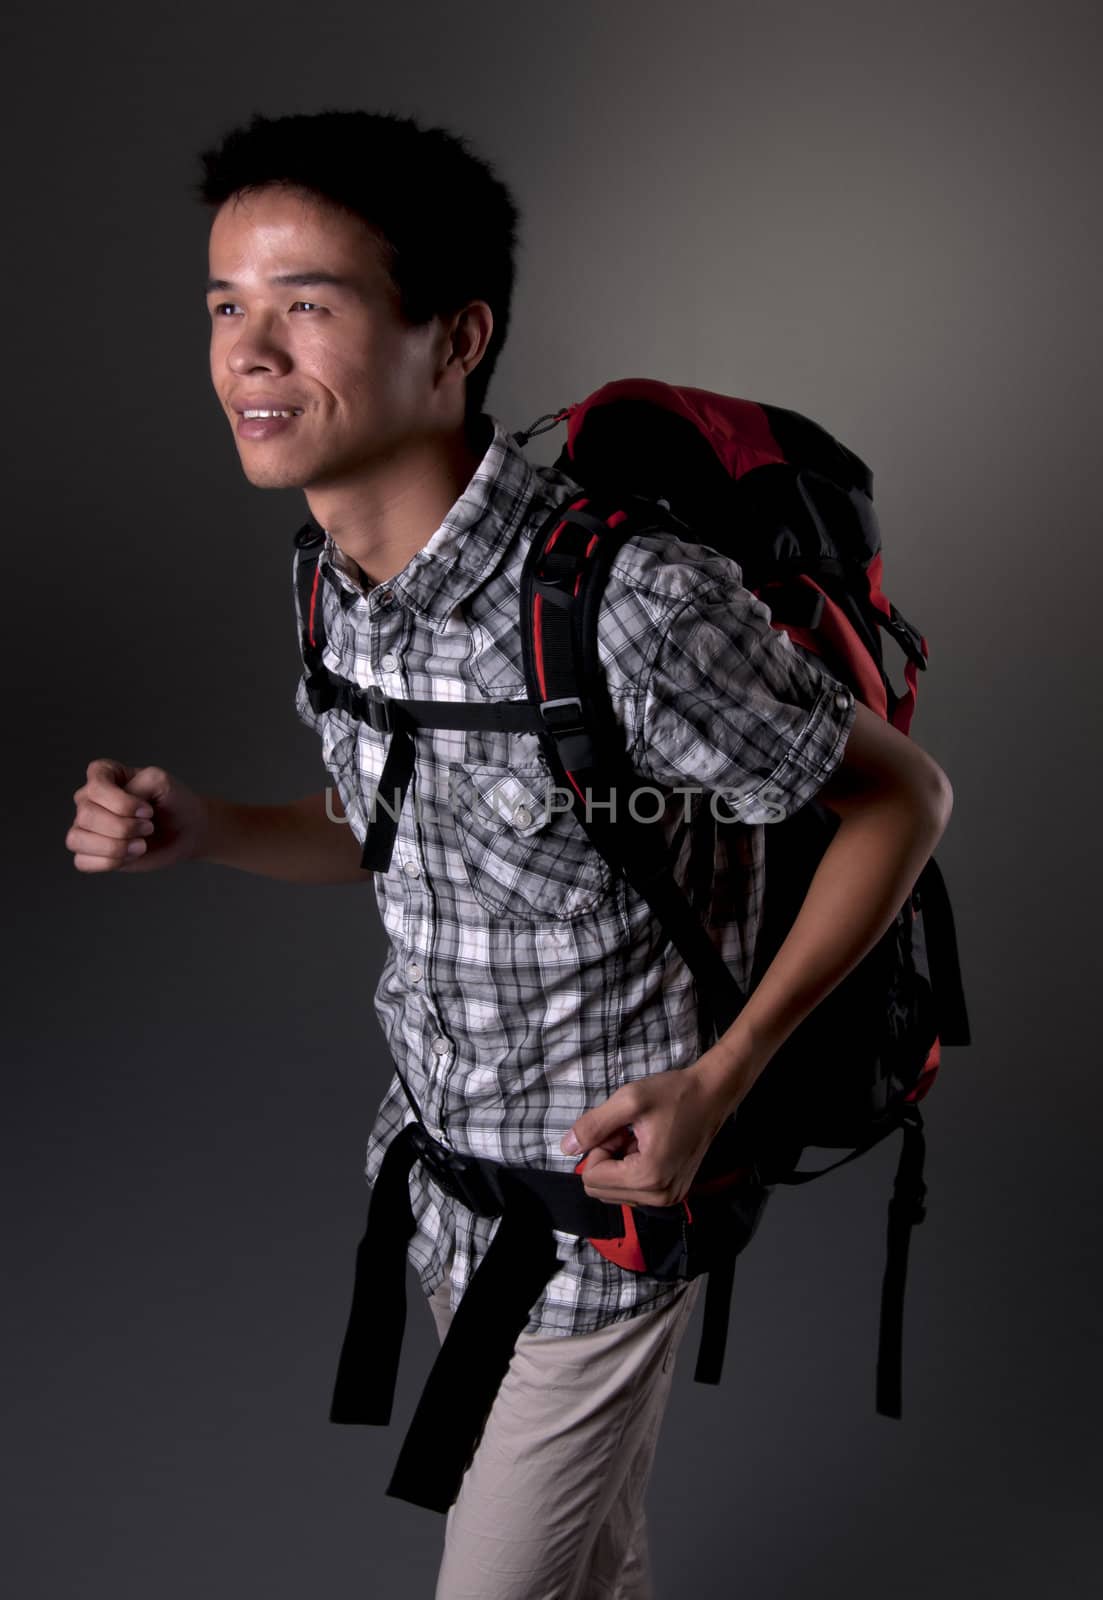 Asian man excited about hiking in the outdoors wearing backpack